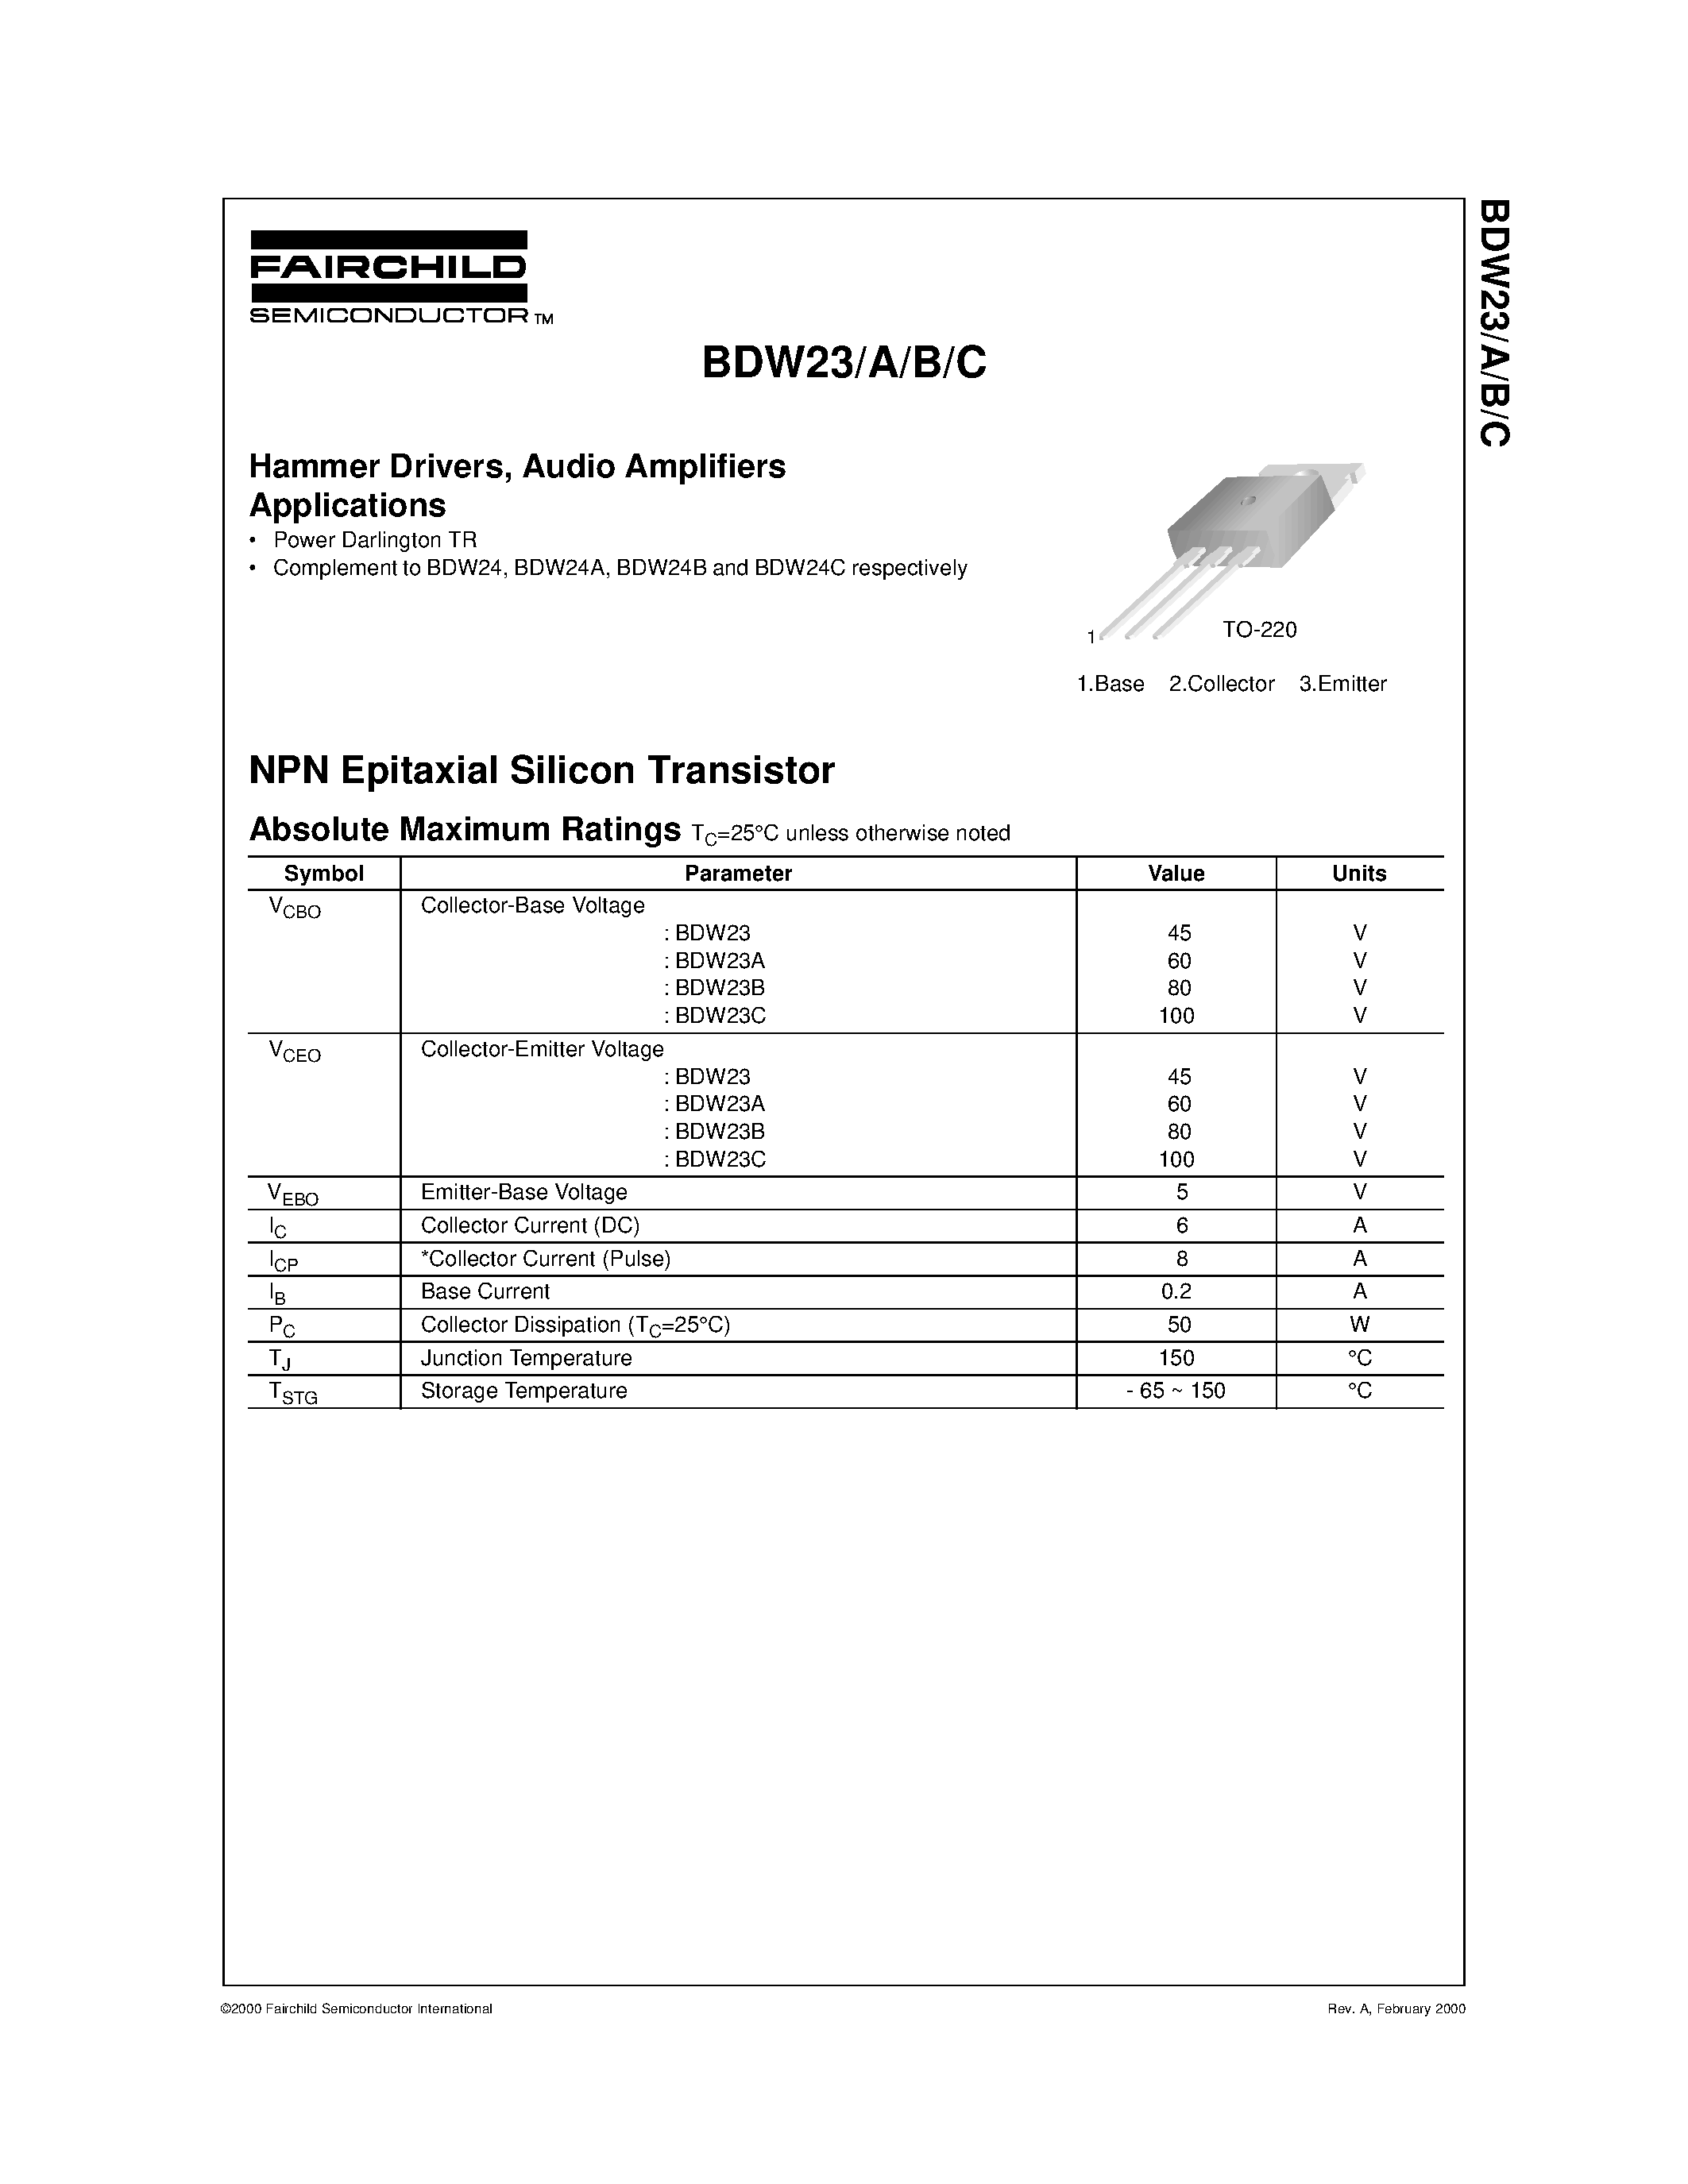 Datasheet BDW23 - Hammer Drivers/ Audio Amplifiers Applications page 1